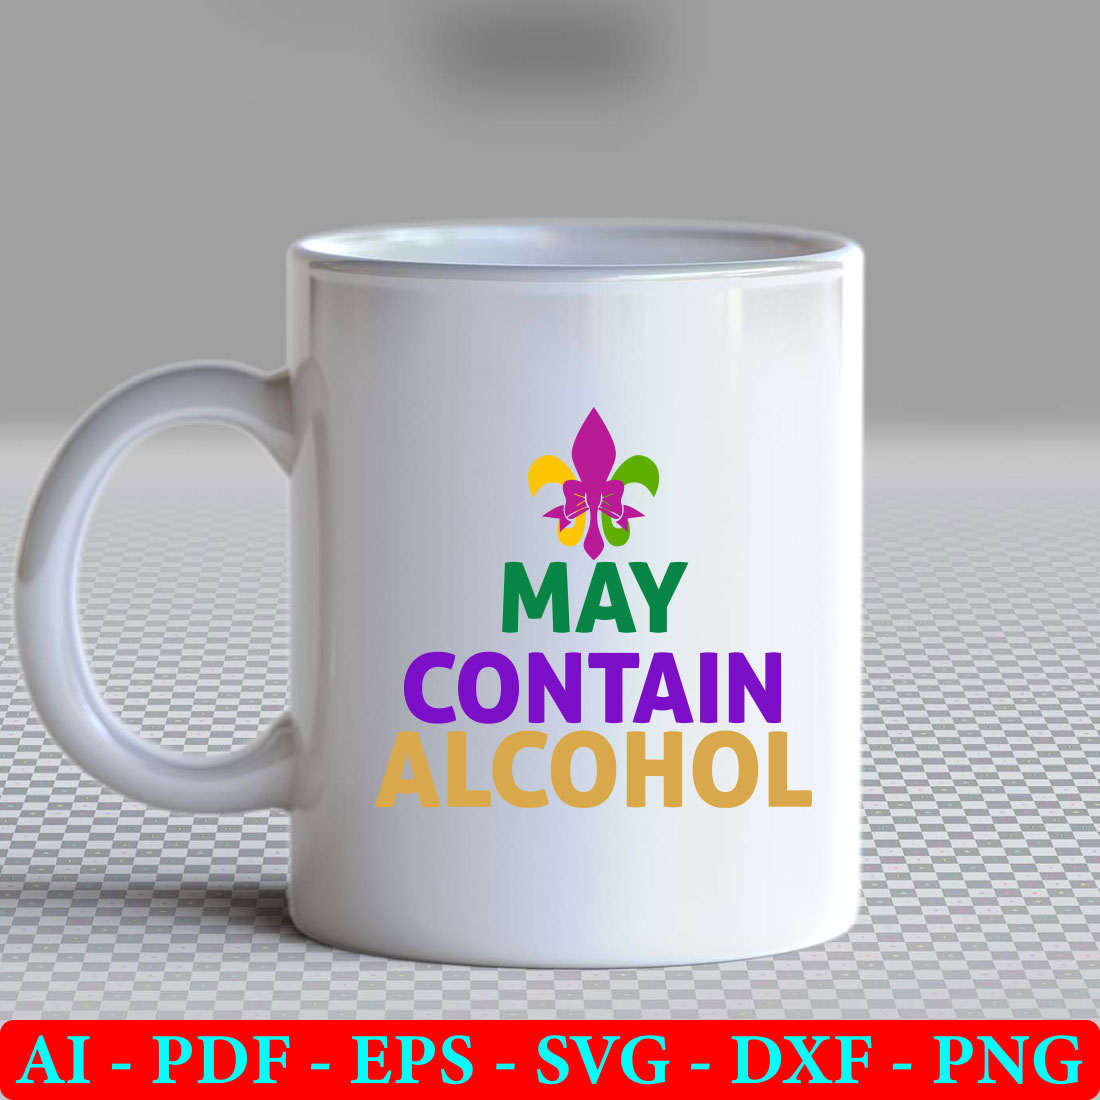 White coffee mug with the words may contain alcohol.